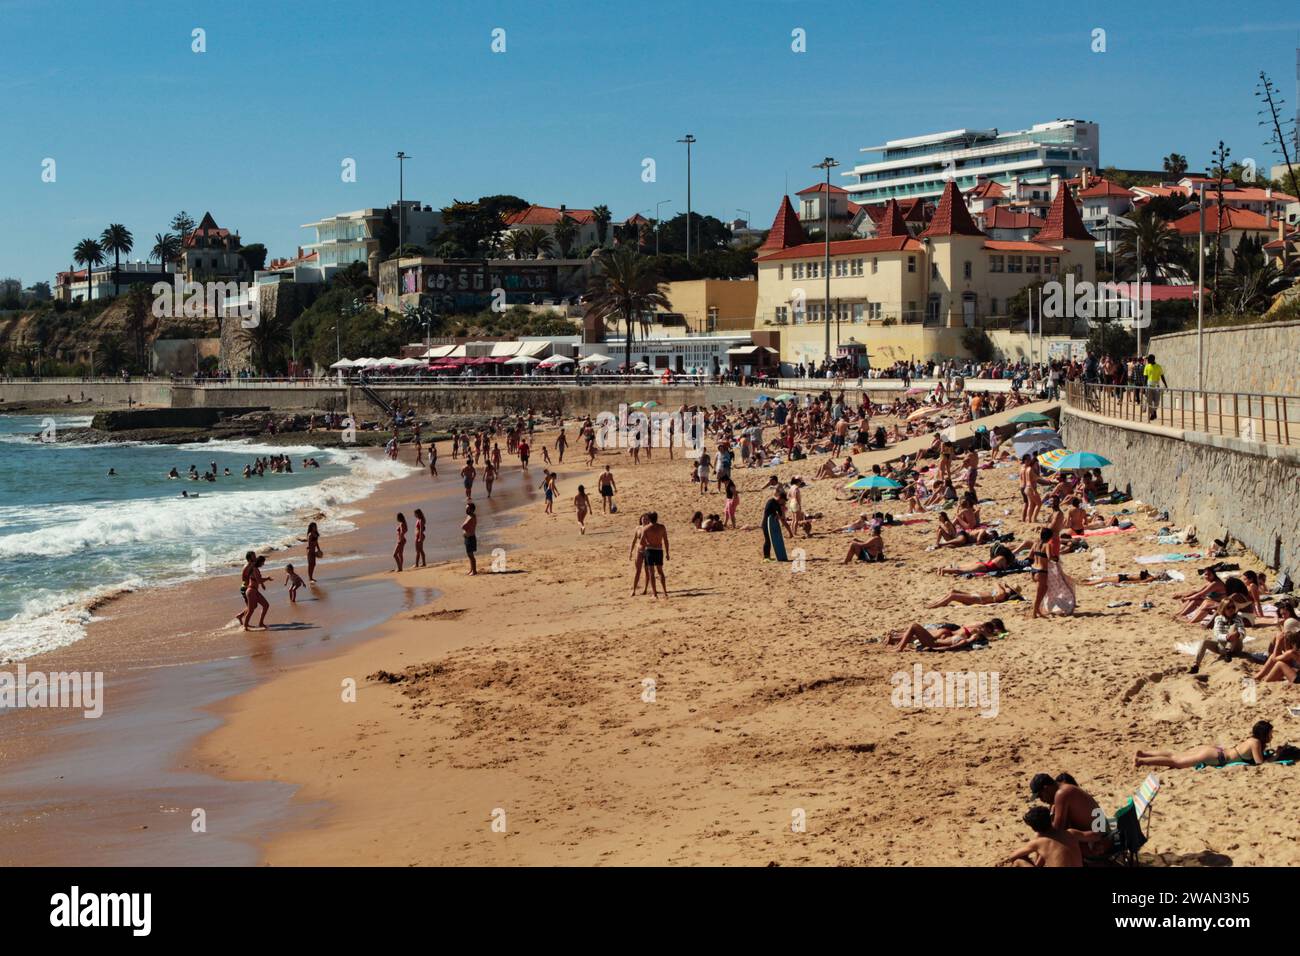 View of the Estoril waterfront, Poças beach and the yellow building of the popular education children's colony, in Estoril, Portugal, Europe Stock Photo